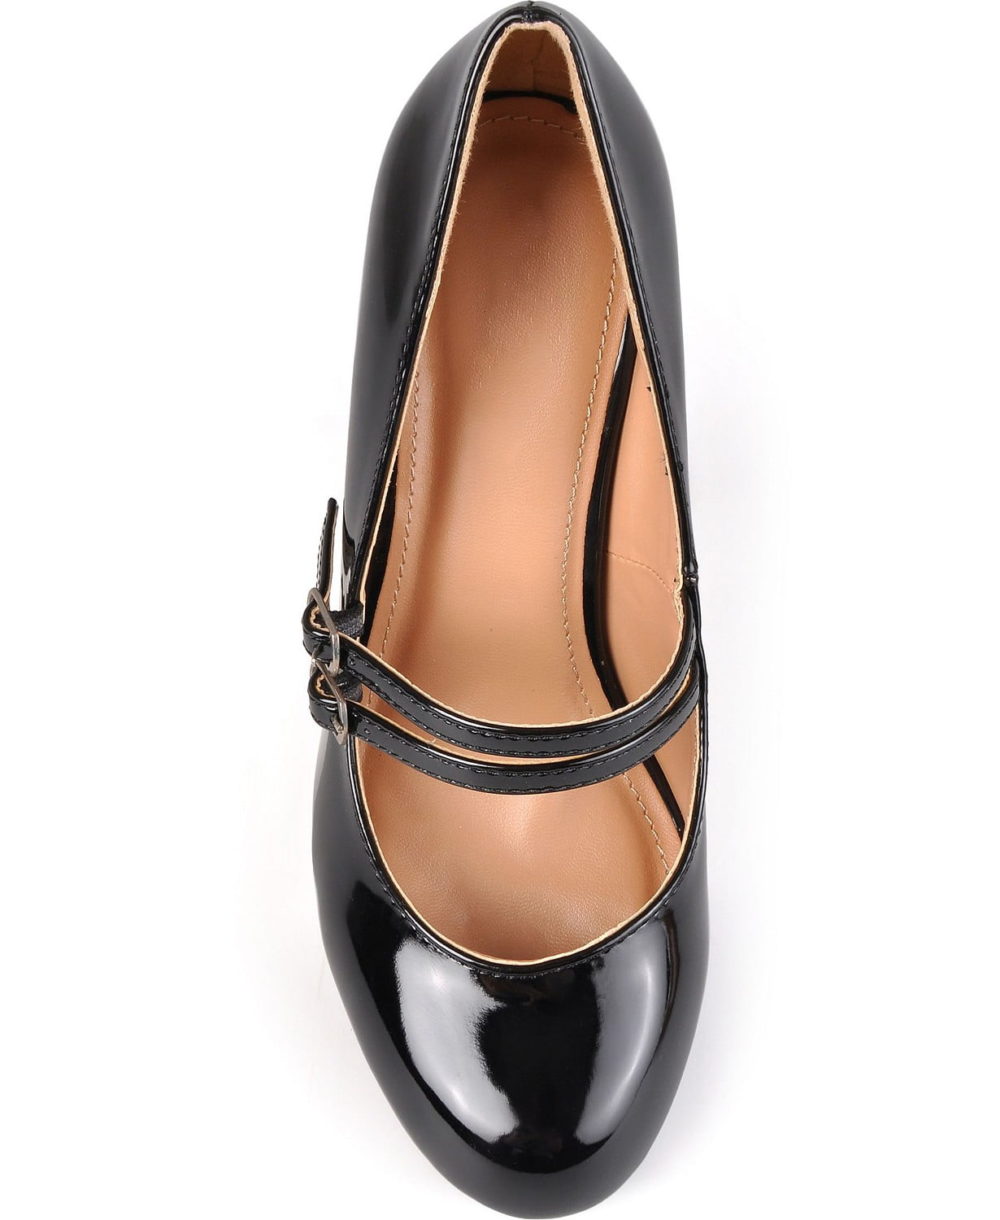 woocommerce-673321-2209615.cloudwaysapps.com-journee-collection-womens-black-wendy-pumps